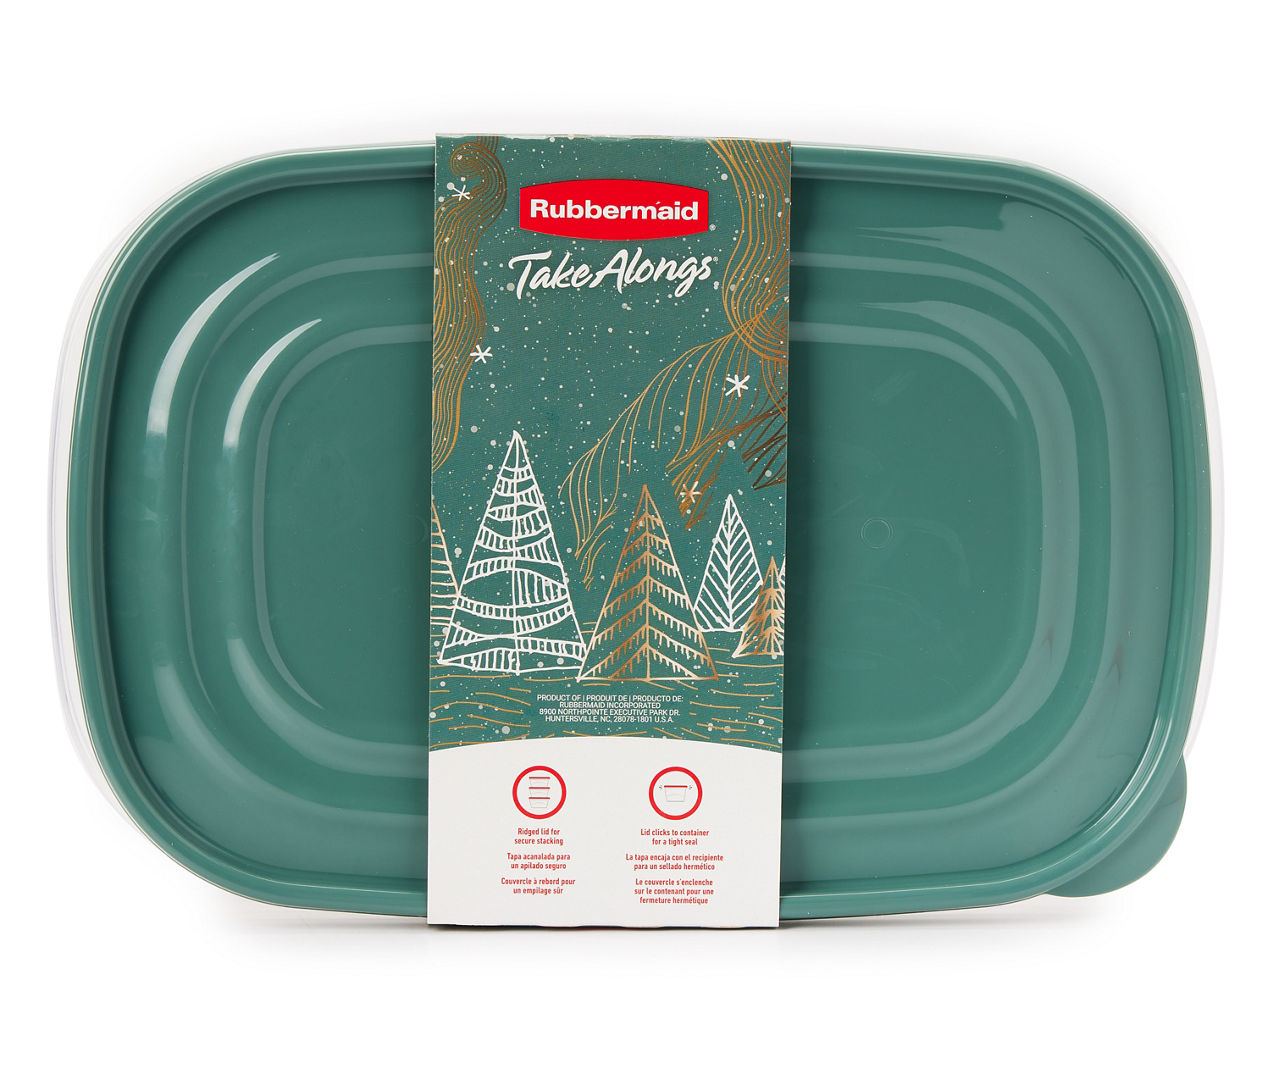 Rubbermaid TakeAlongs 1-Gallon Rectangular Food Storage Containers,  Special-Edition Turquoise Spell Blue, 2-Pack 